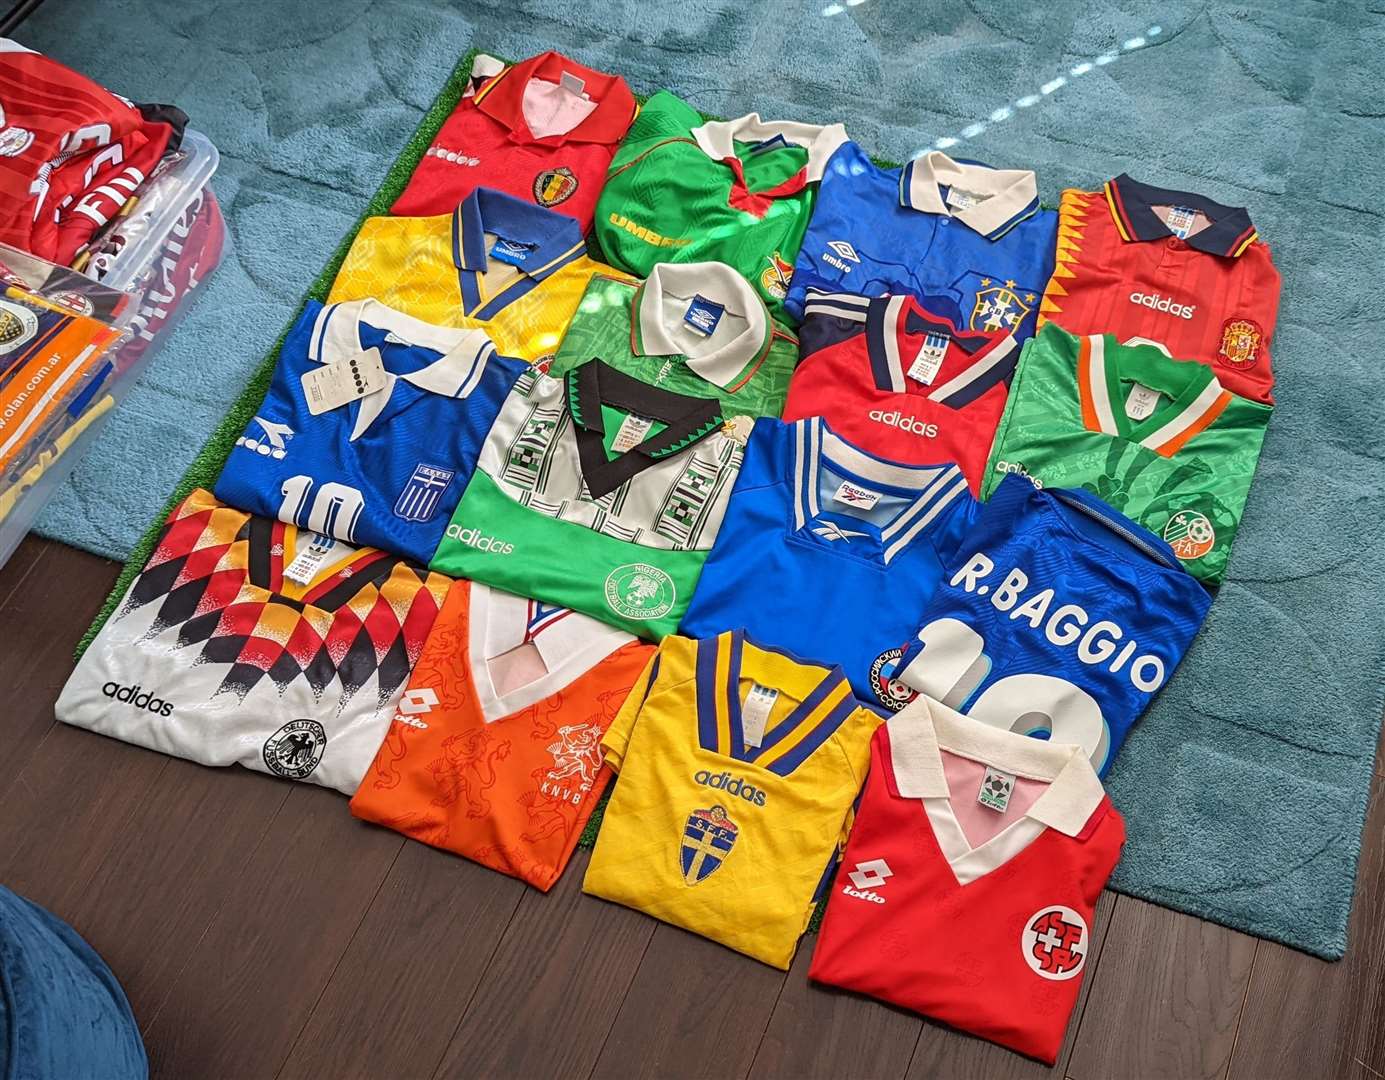 Baz Davison's jersey collection from the 1994 USA World Cup